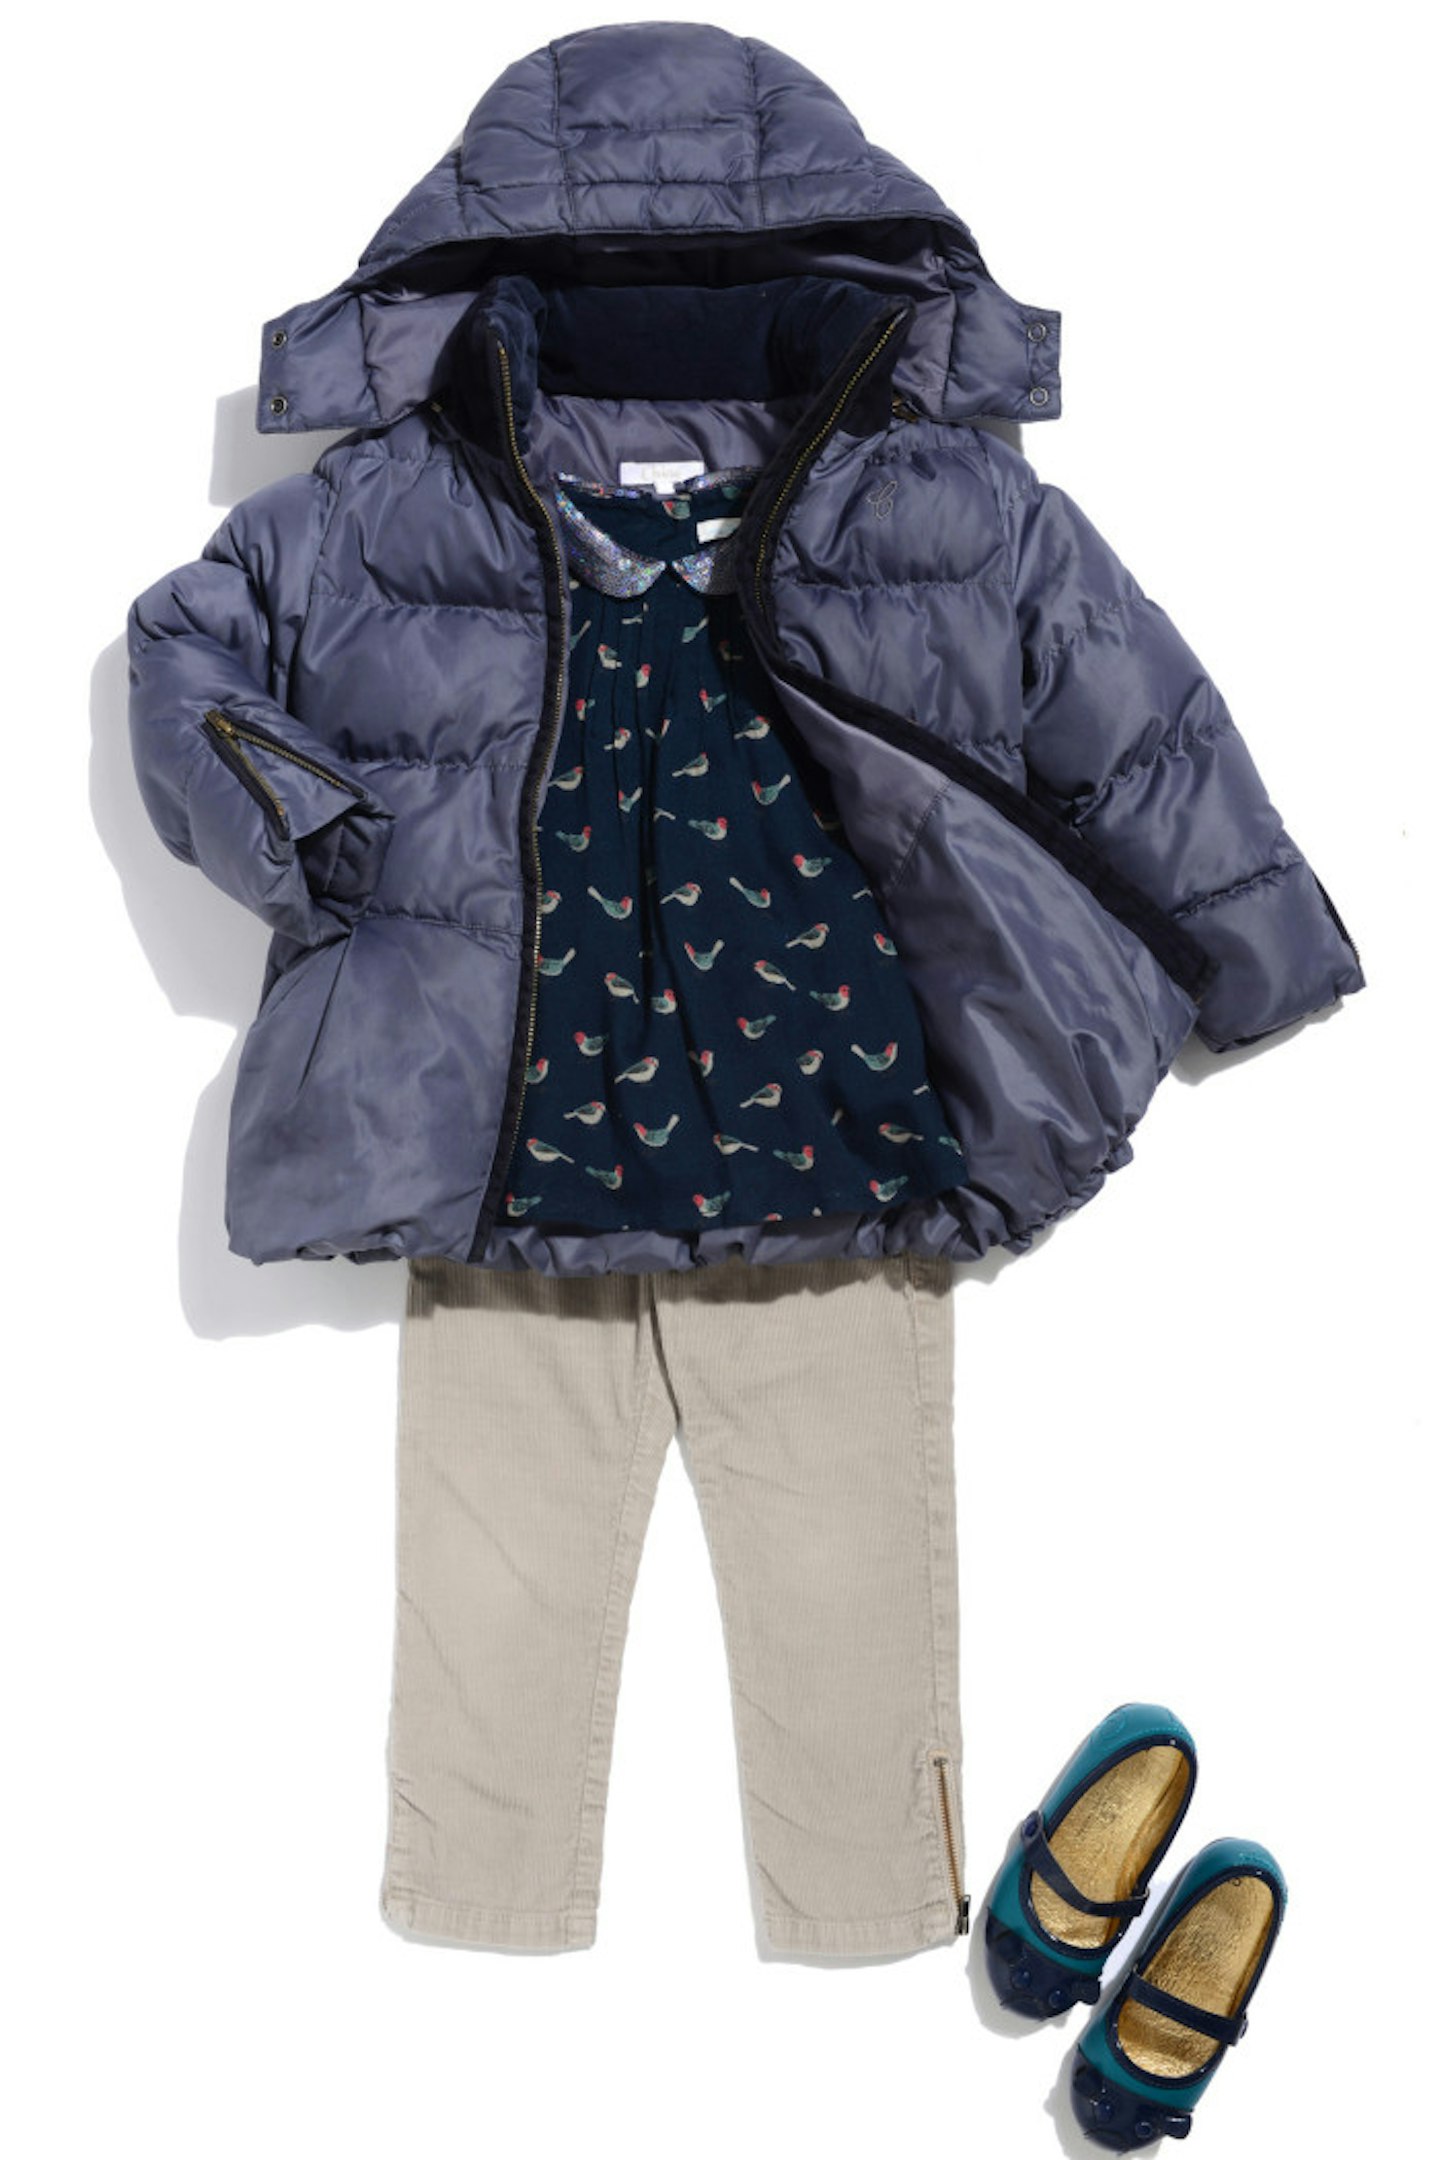 Bonpoint grey cords with a Marie Chantal bird/sequin shirt, Chloe puffa coat and Marc Jacobs green/blue pumps